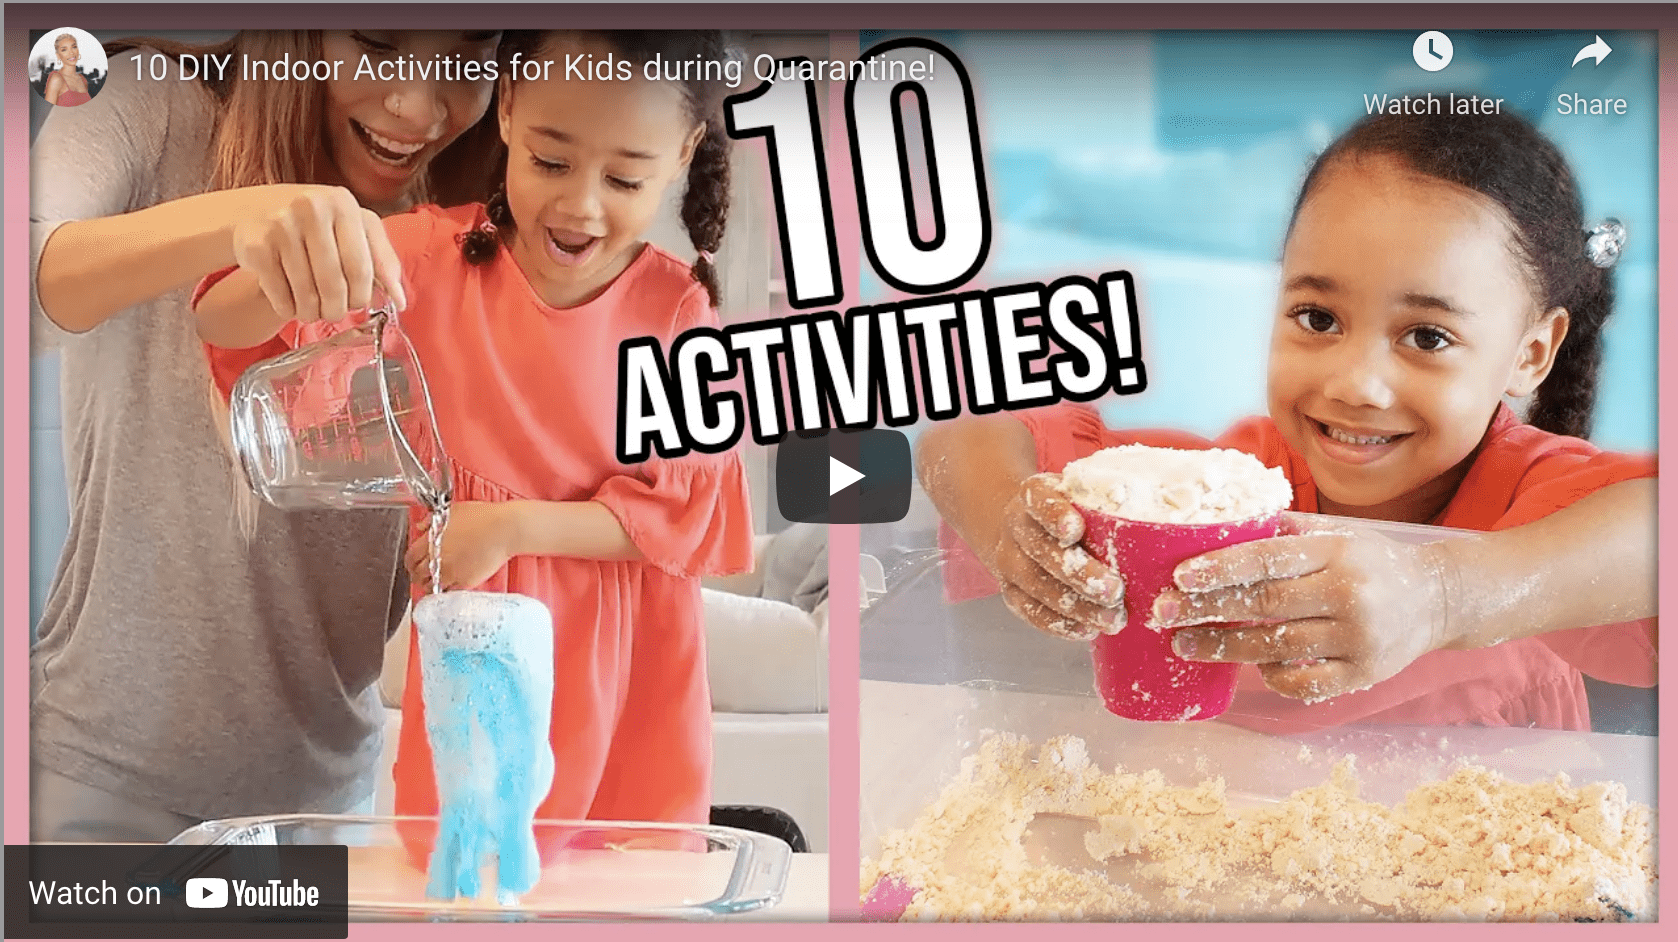 Screen shot of the YouTube video on indoor activities for children ages 2 to 5.